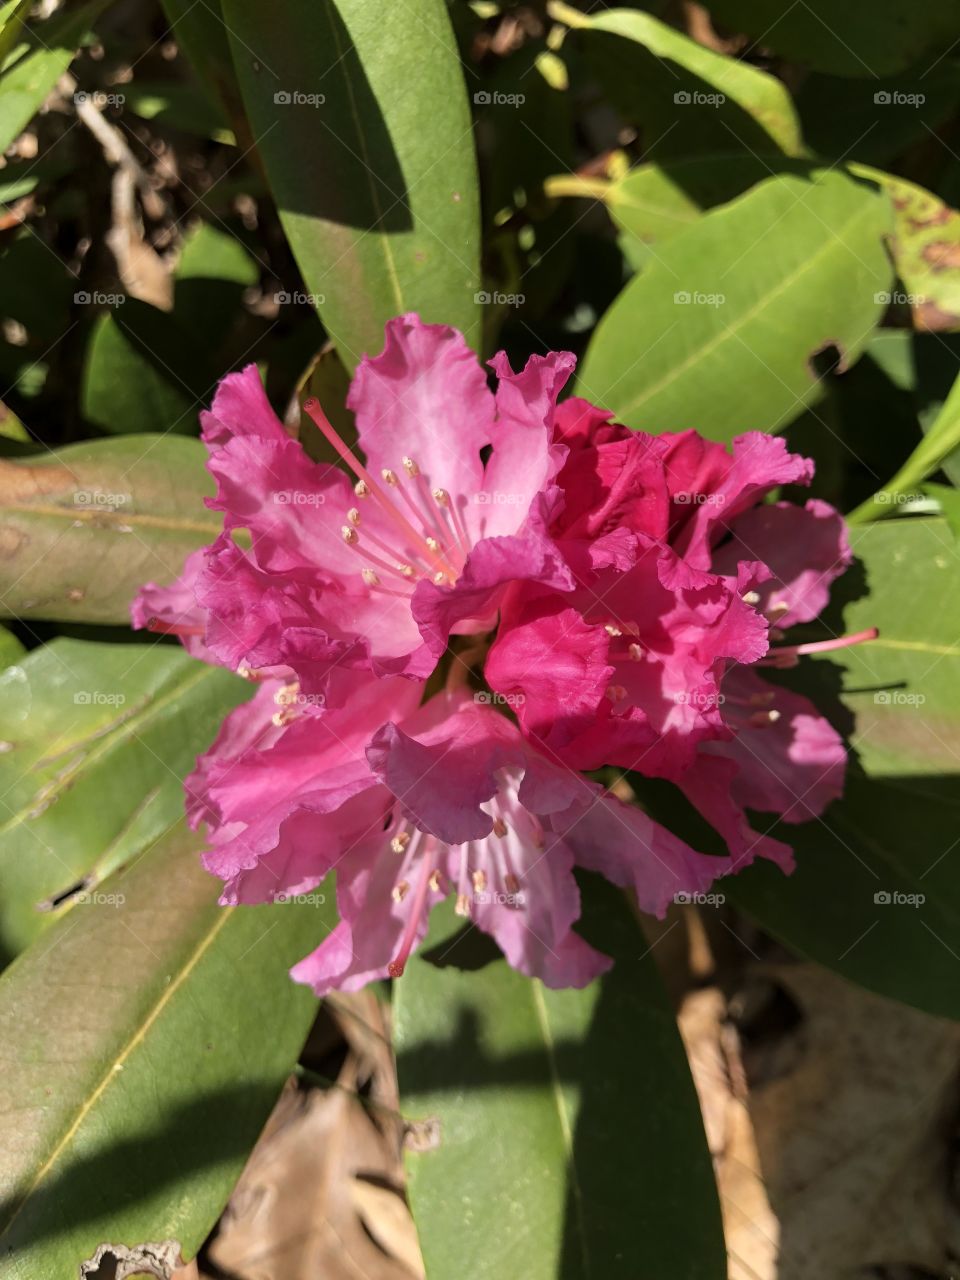 A beautiful purple rhododendron!